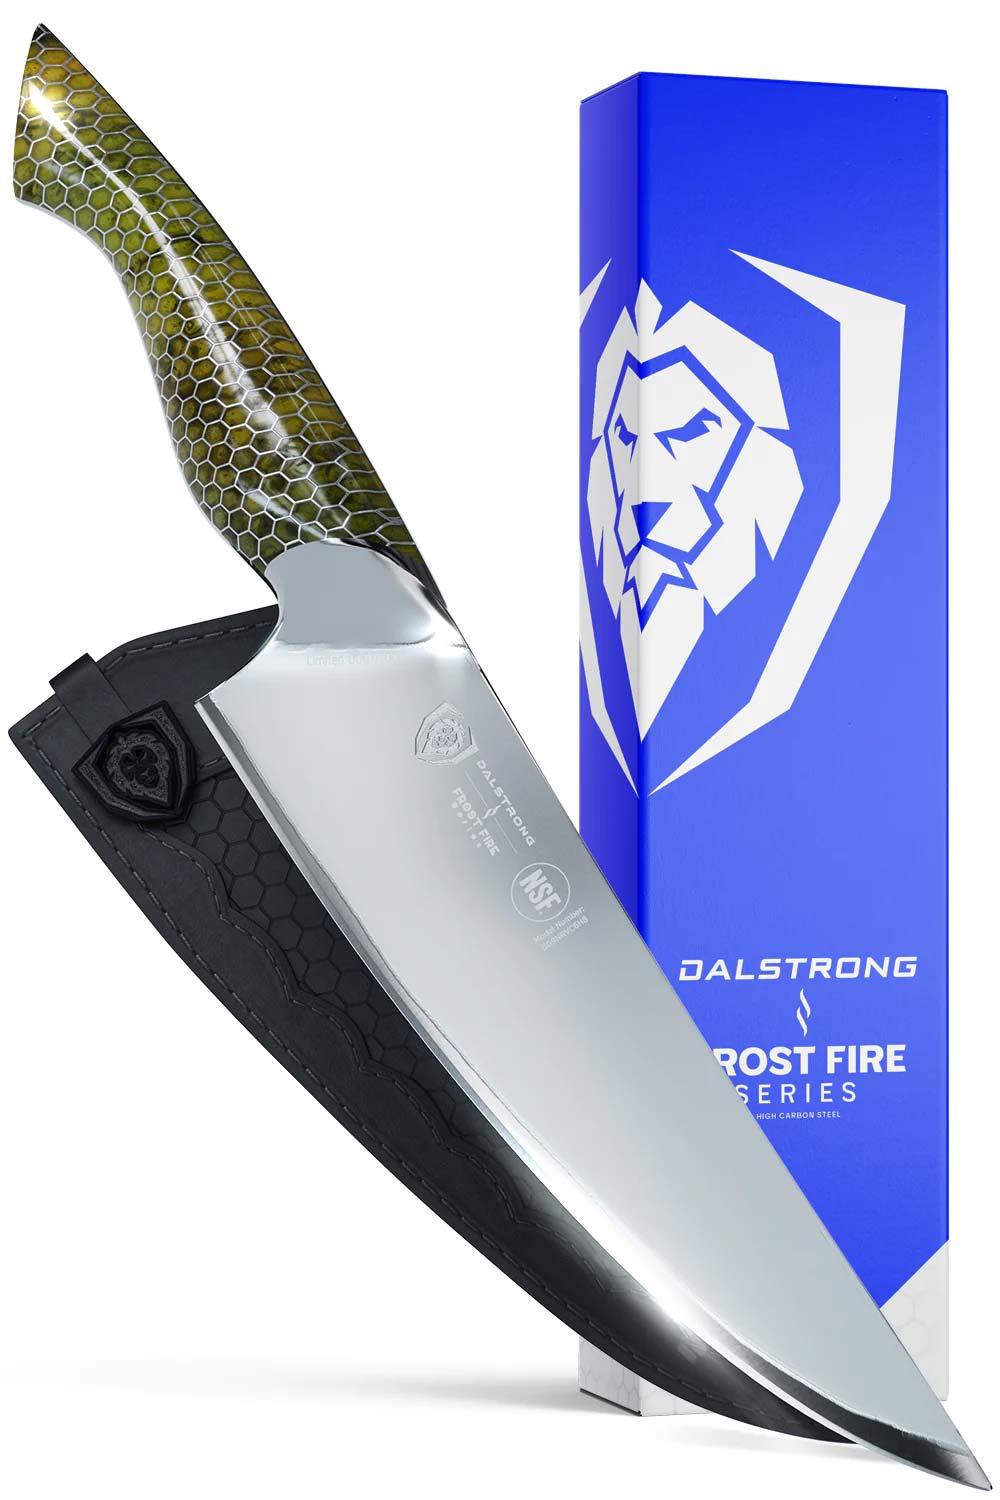 Chef's Knife 8" | Limited Edition Dragon Skin Handle | Glacial Lightning Edition | Frost Fire Series | NSF Certified Dalstrong ©